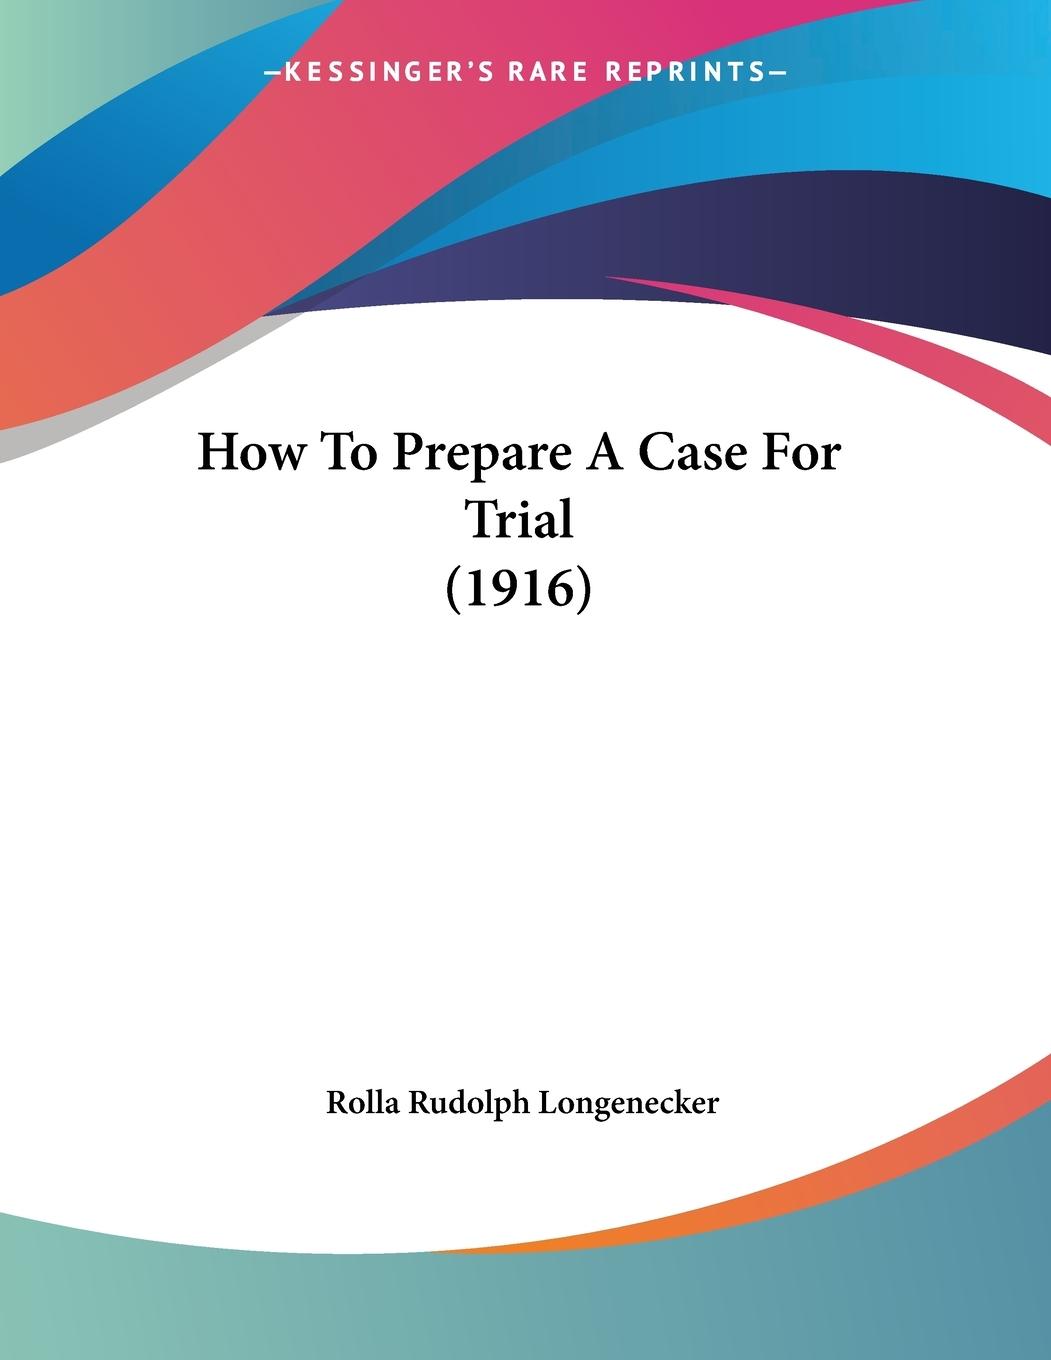 How To Prepare A Case For Trial (1916) - Longenecker, Rolla Rudolph